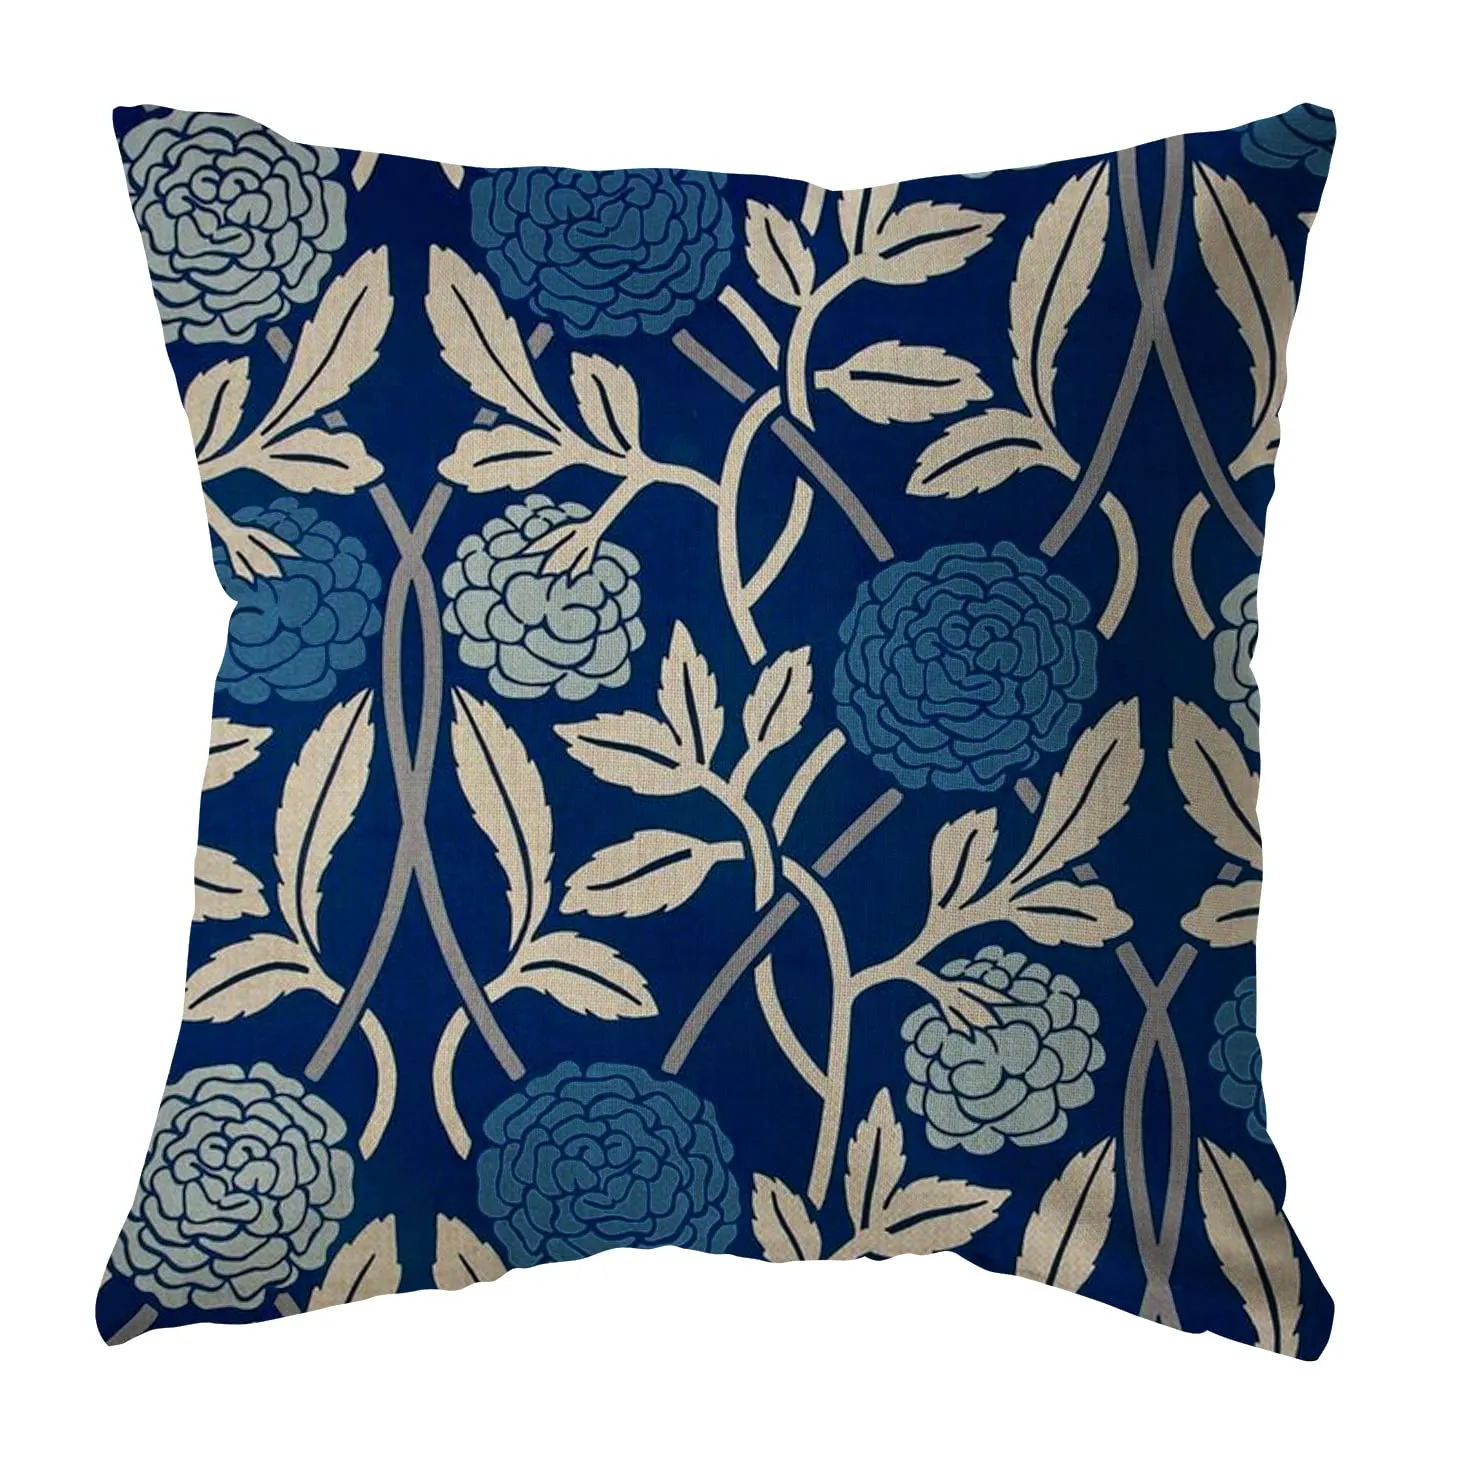 set of 4 blue flowers leaf bird retro rustic farmhouse throw pillow covers 18x18 inch leaves cotton linen floral cushion case sofa throw pillows cover living room bed indoors home decor gift